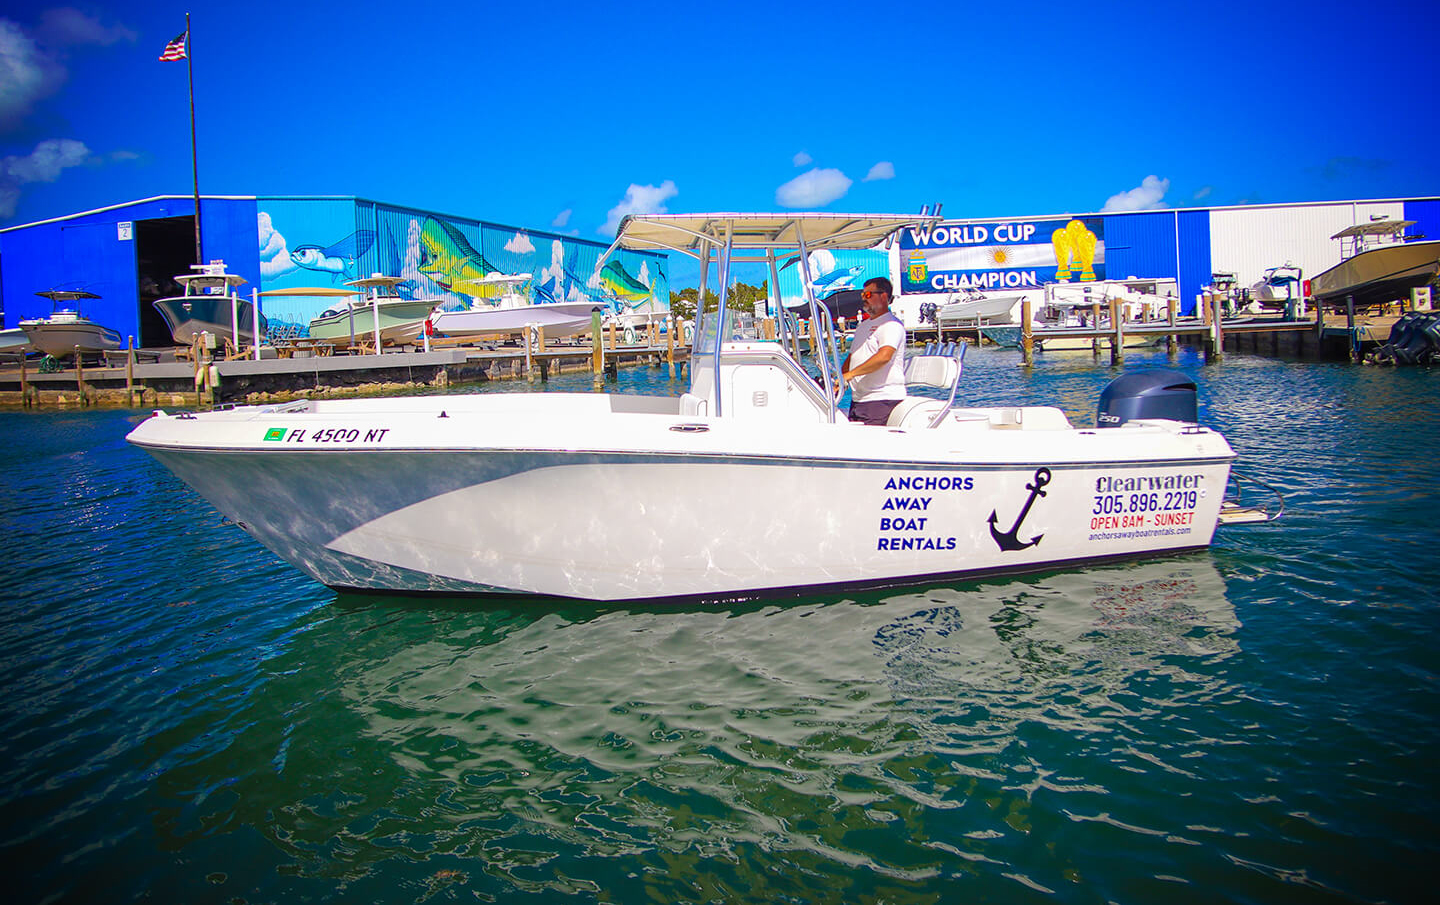 An image of Boat #9 - 23’ CLEARWATER from Anchors Away Boat Rentals